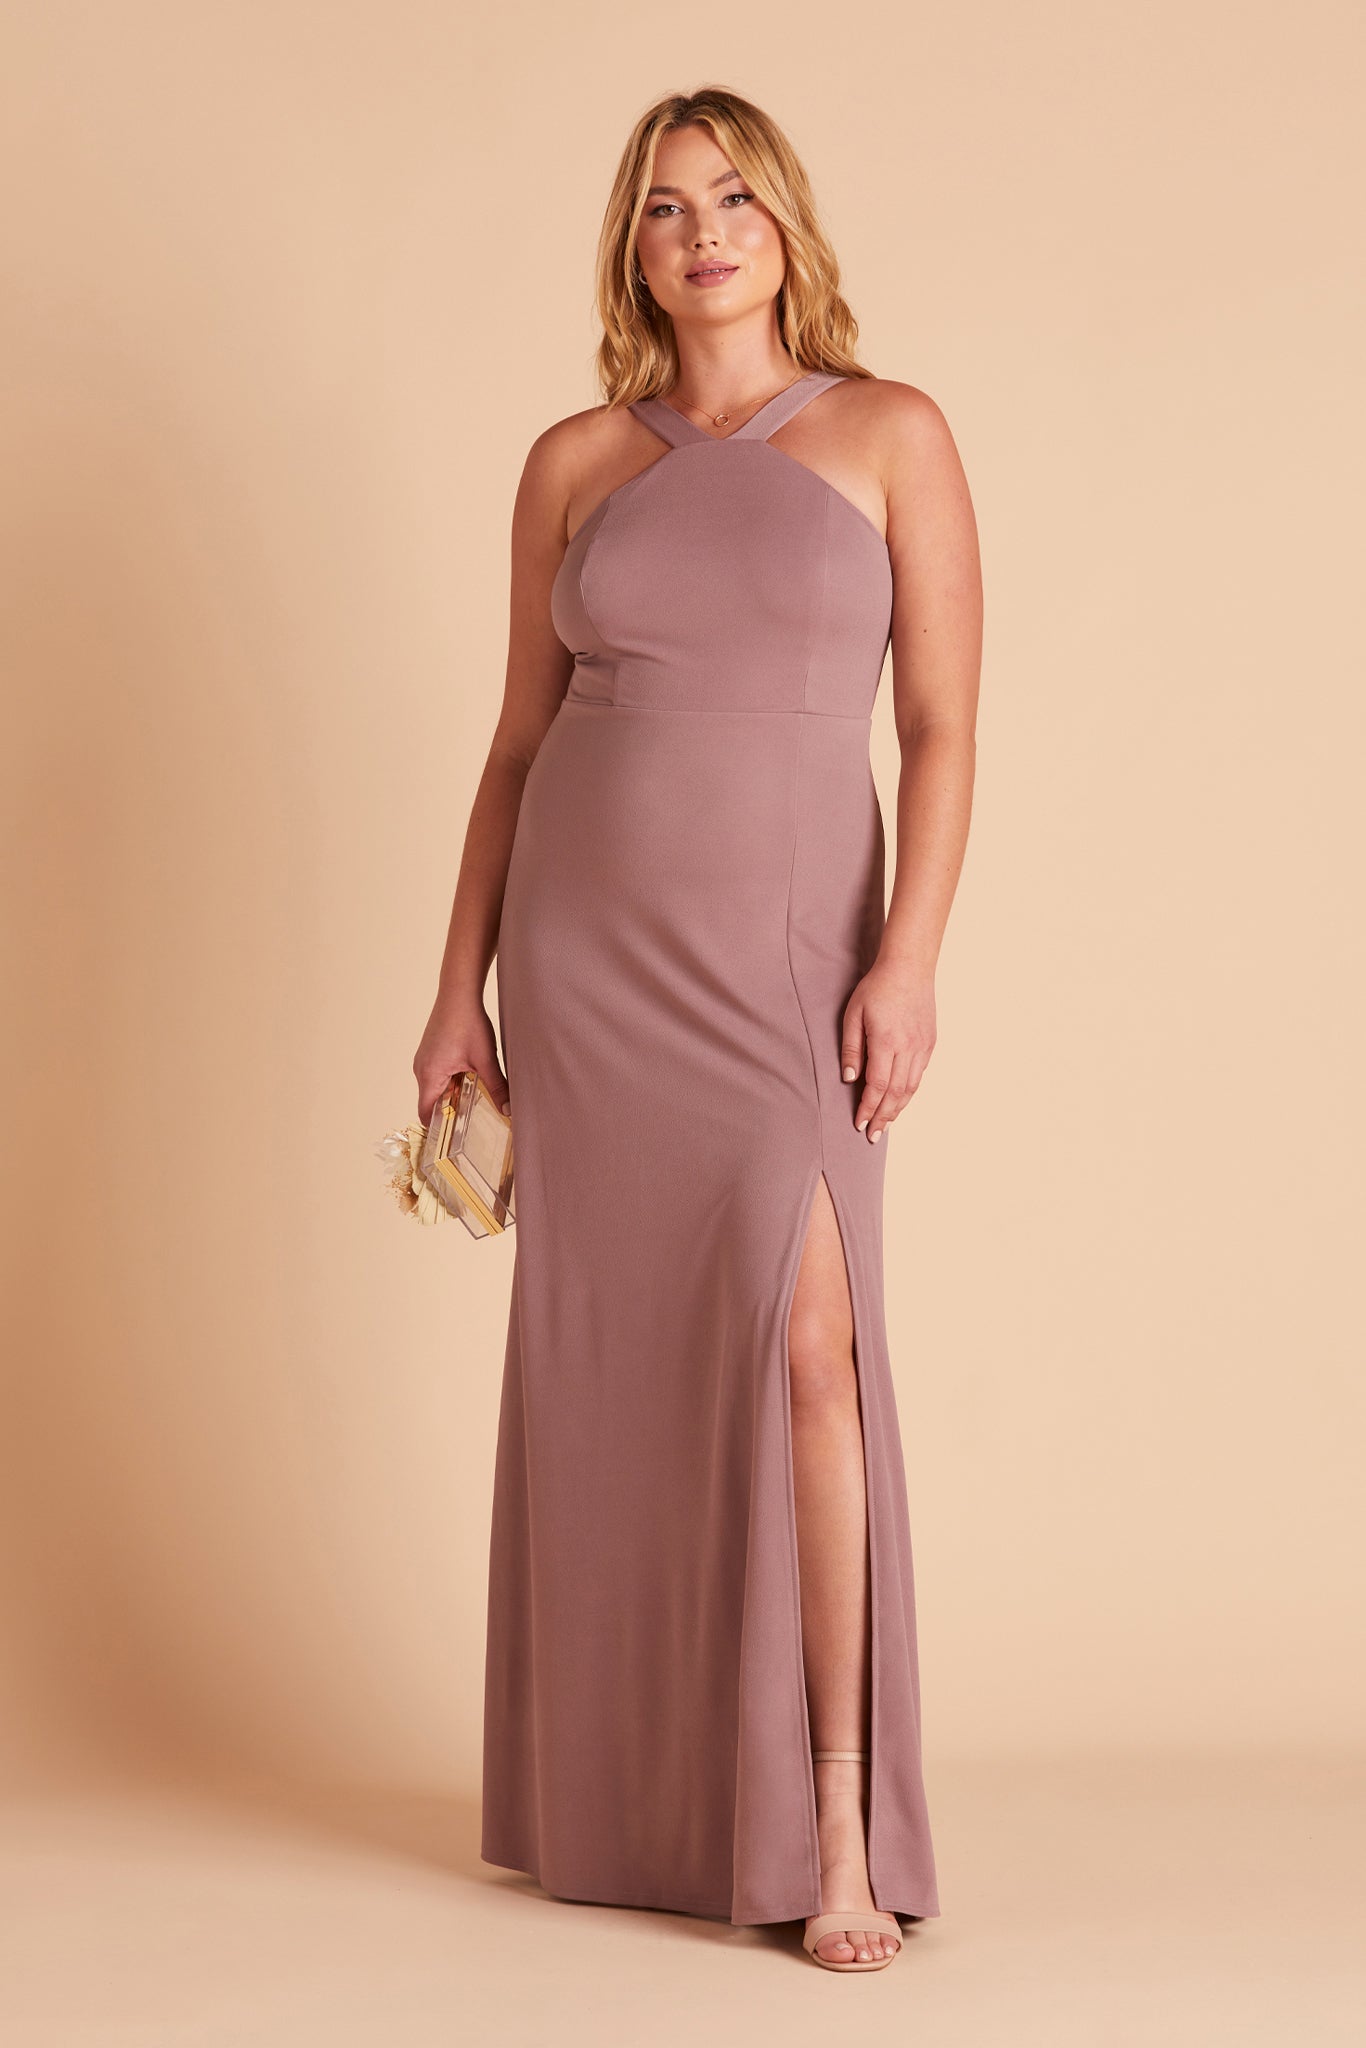 Gene convertible plus size bridesmaid dress with slit in dark mauve crepe by Birdy Grey, front view